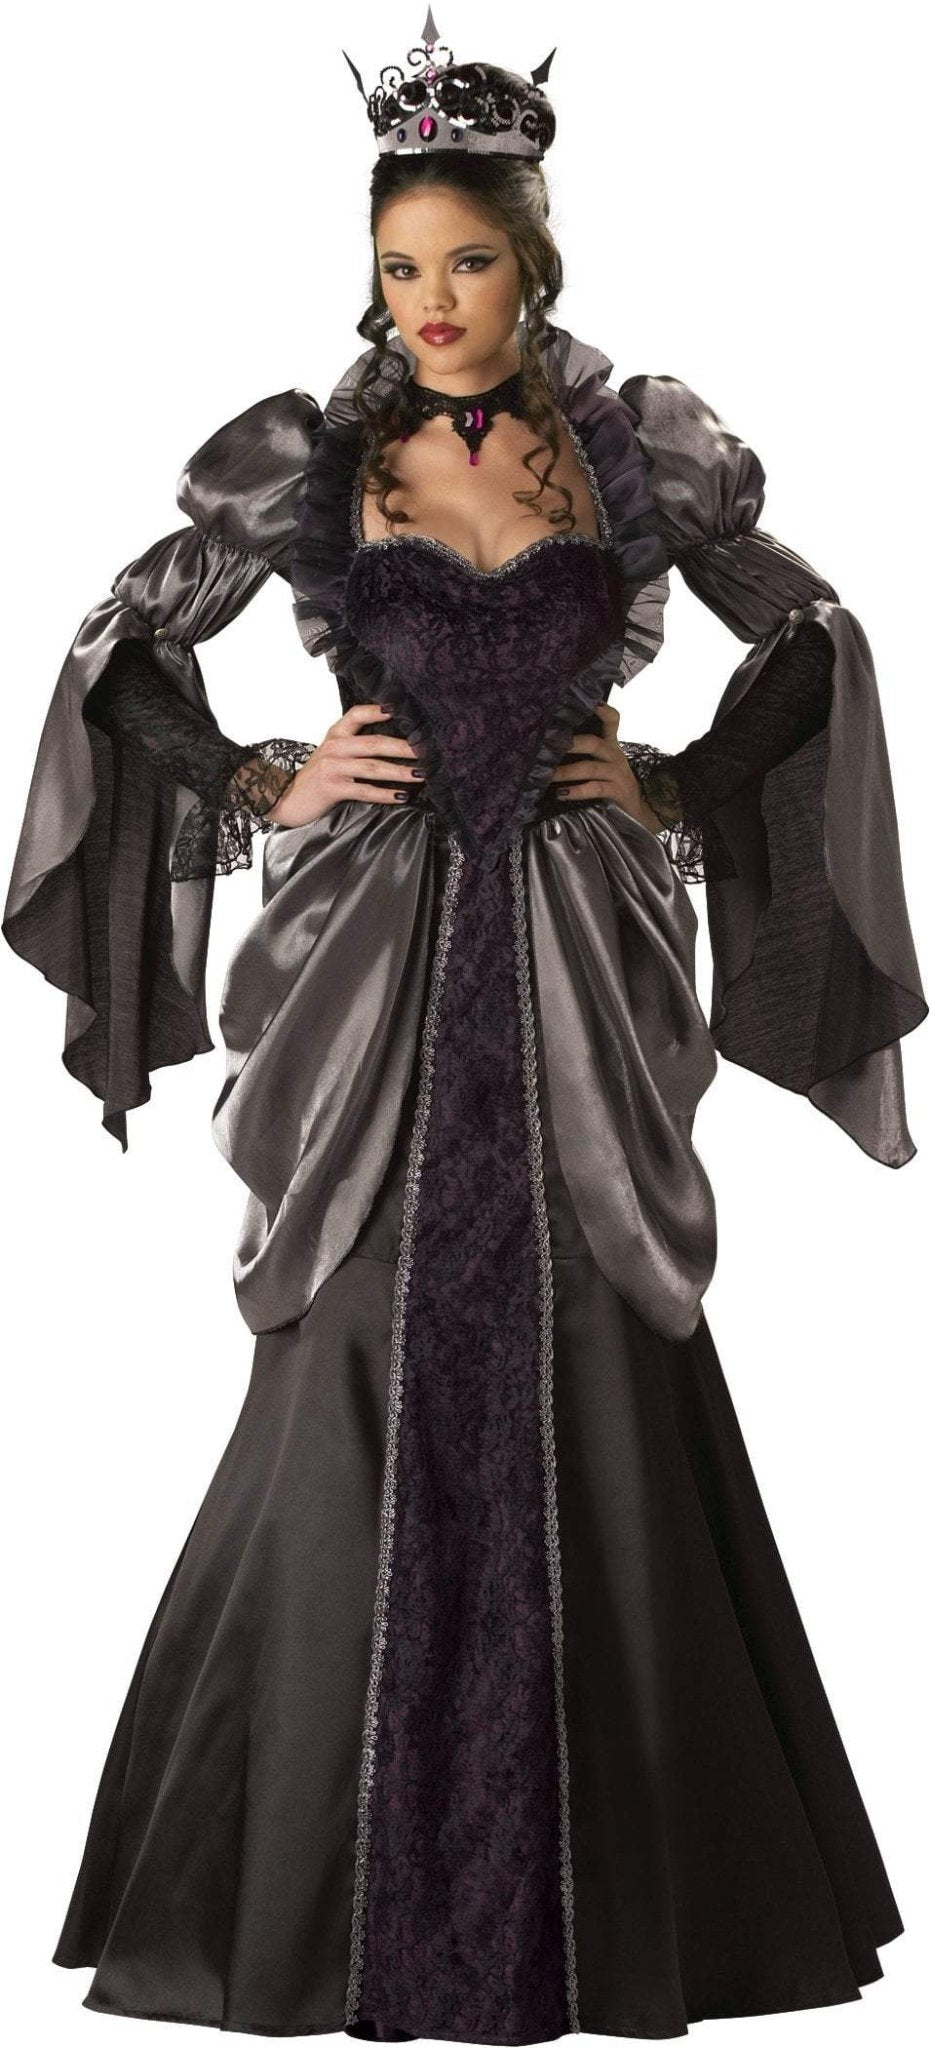 Wicked Queen Deluxe Costume - JJ's Party House